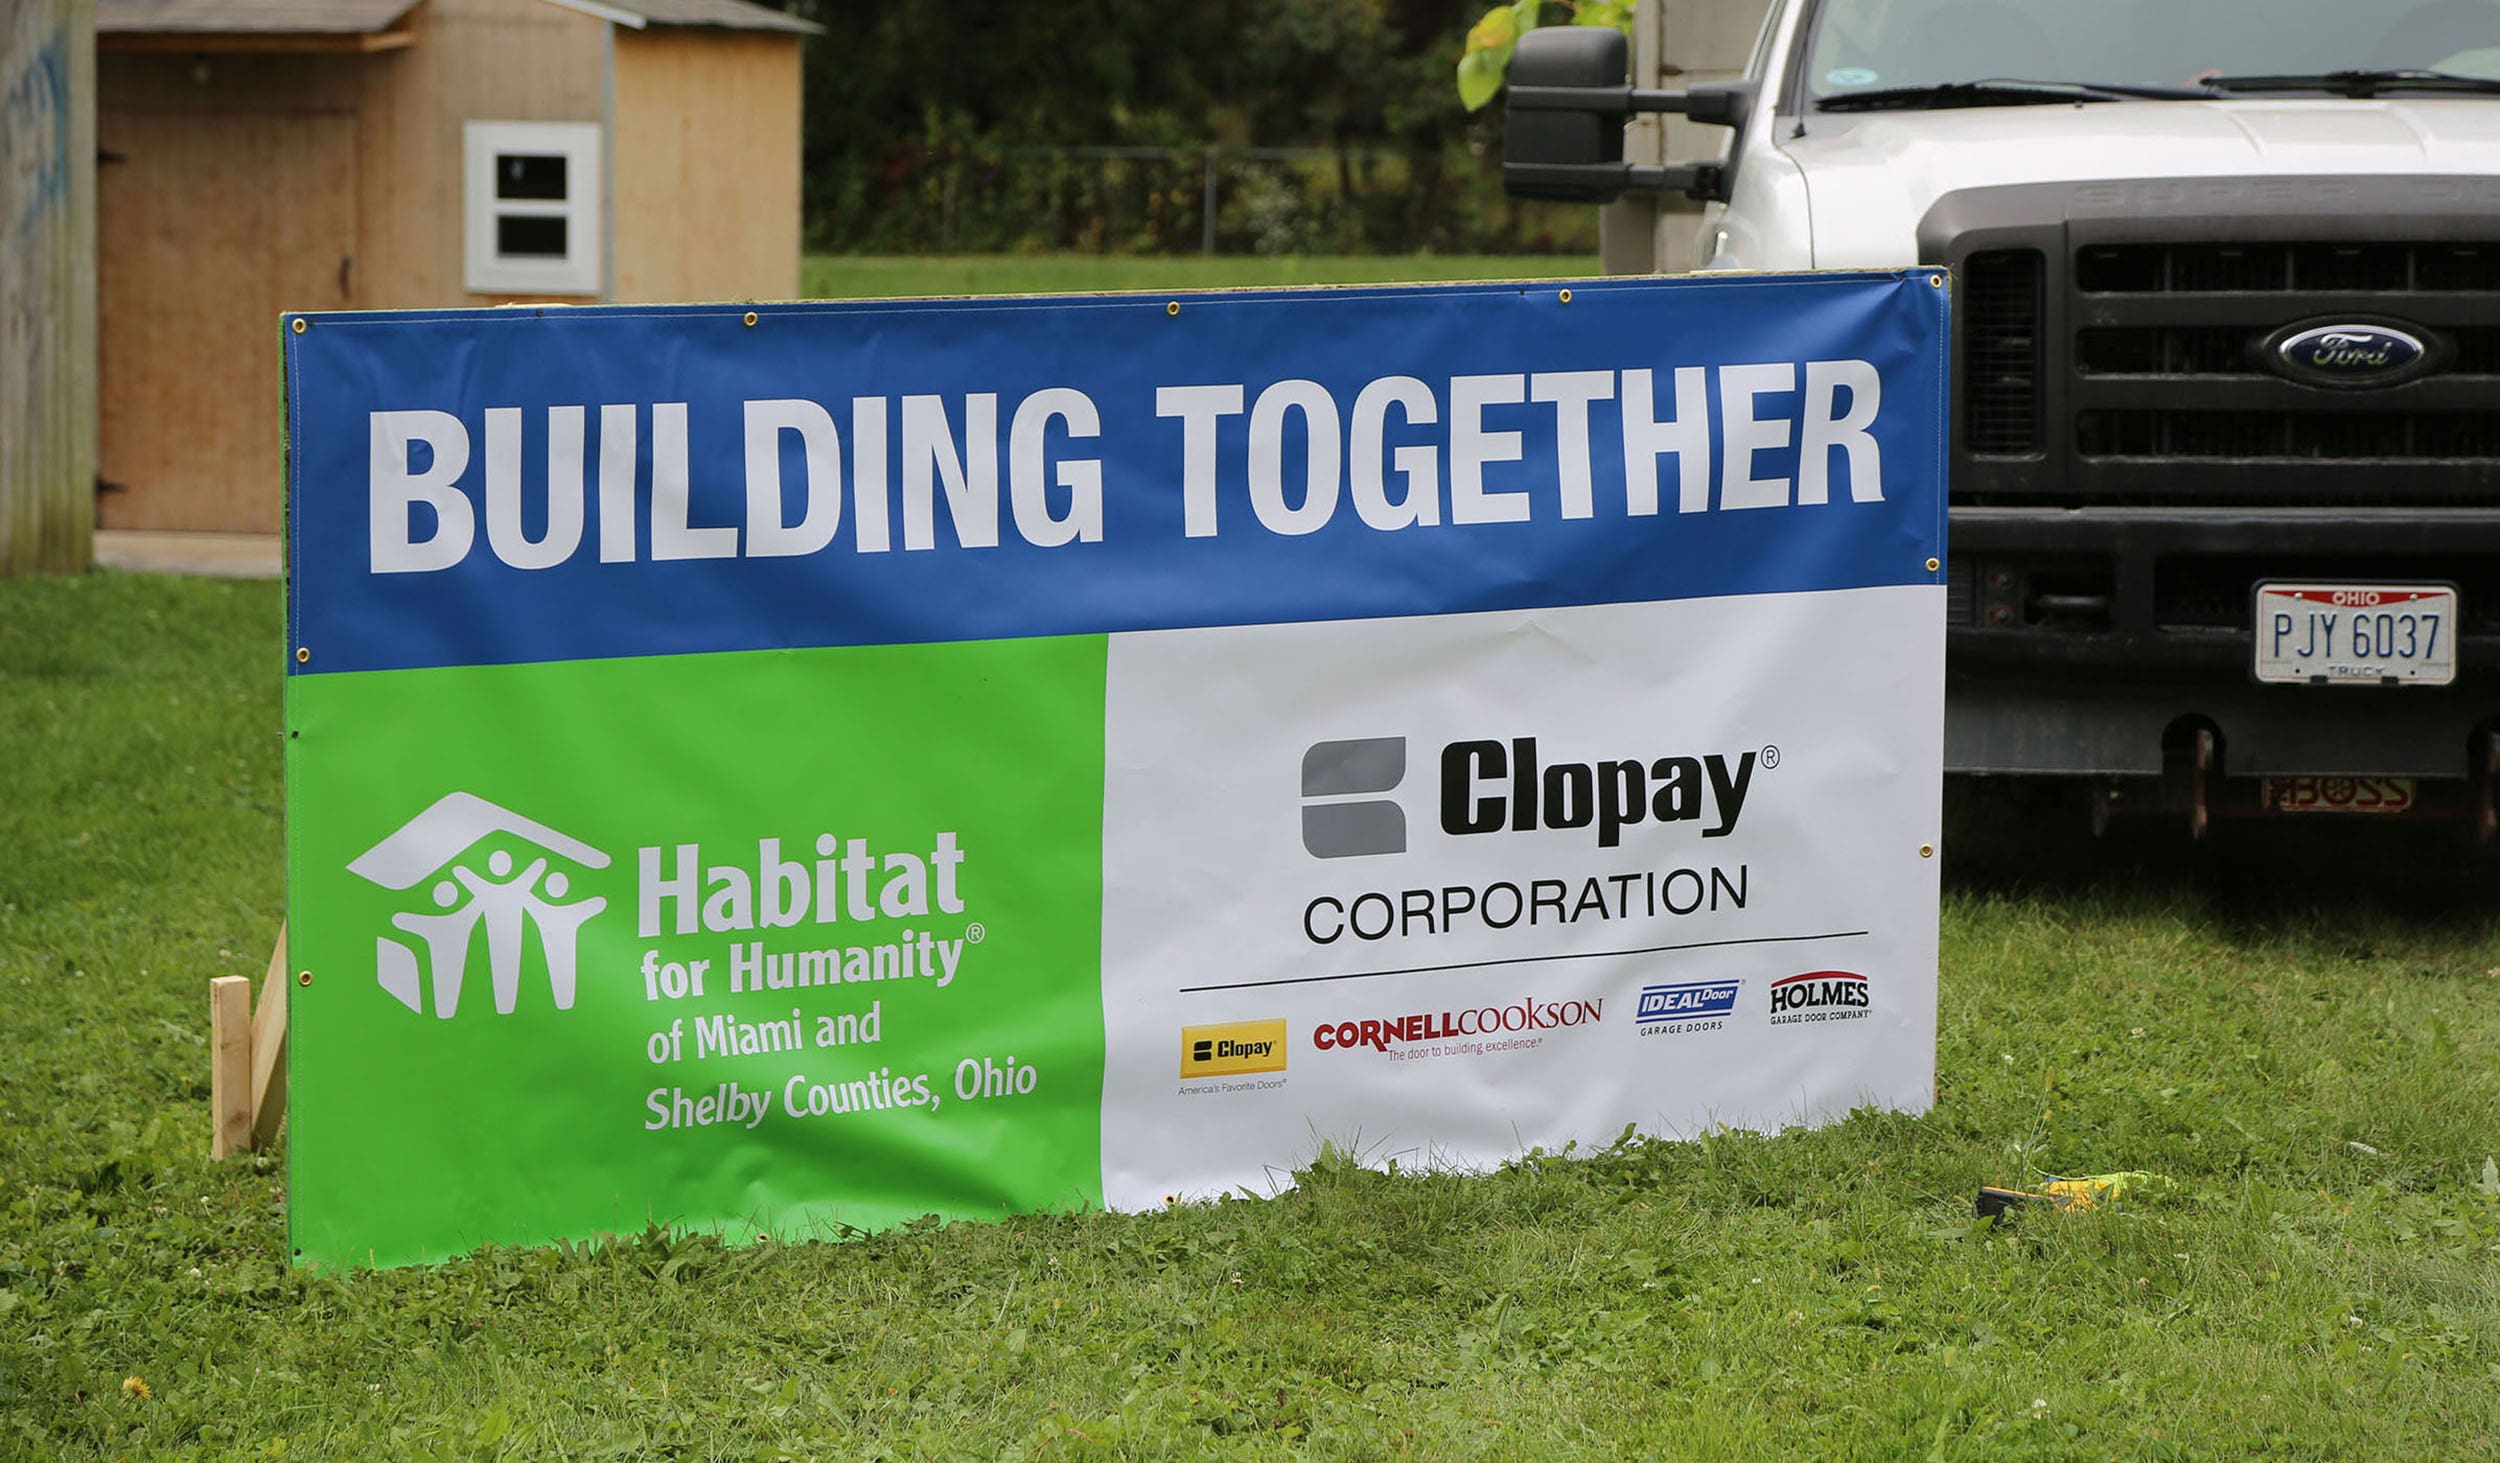 Habitat for Humanity & Clopay Sign